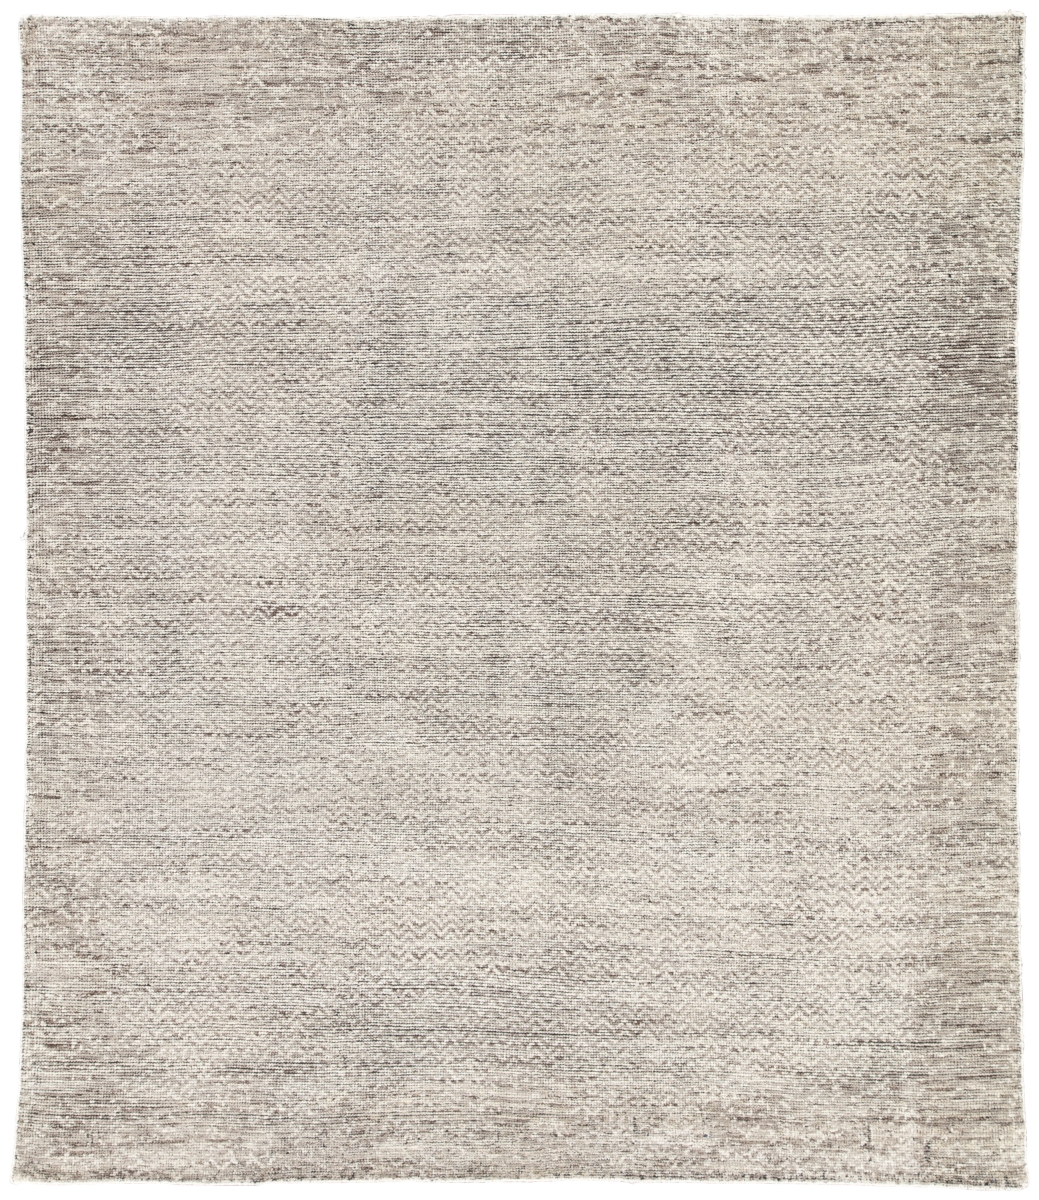 Rug136505 8 X 10 Ft. Rize Shervin Hand-knotted Chevron Dark Gray & Ivory Area Rug